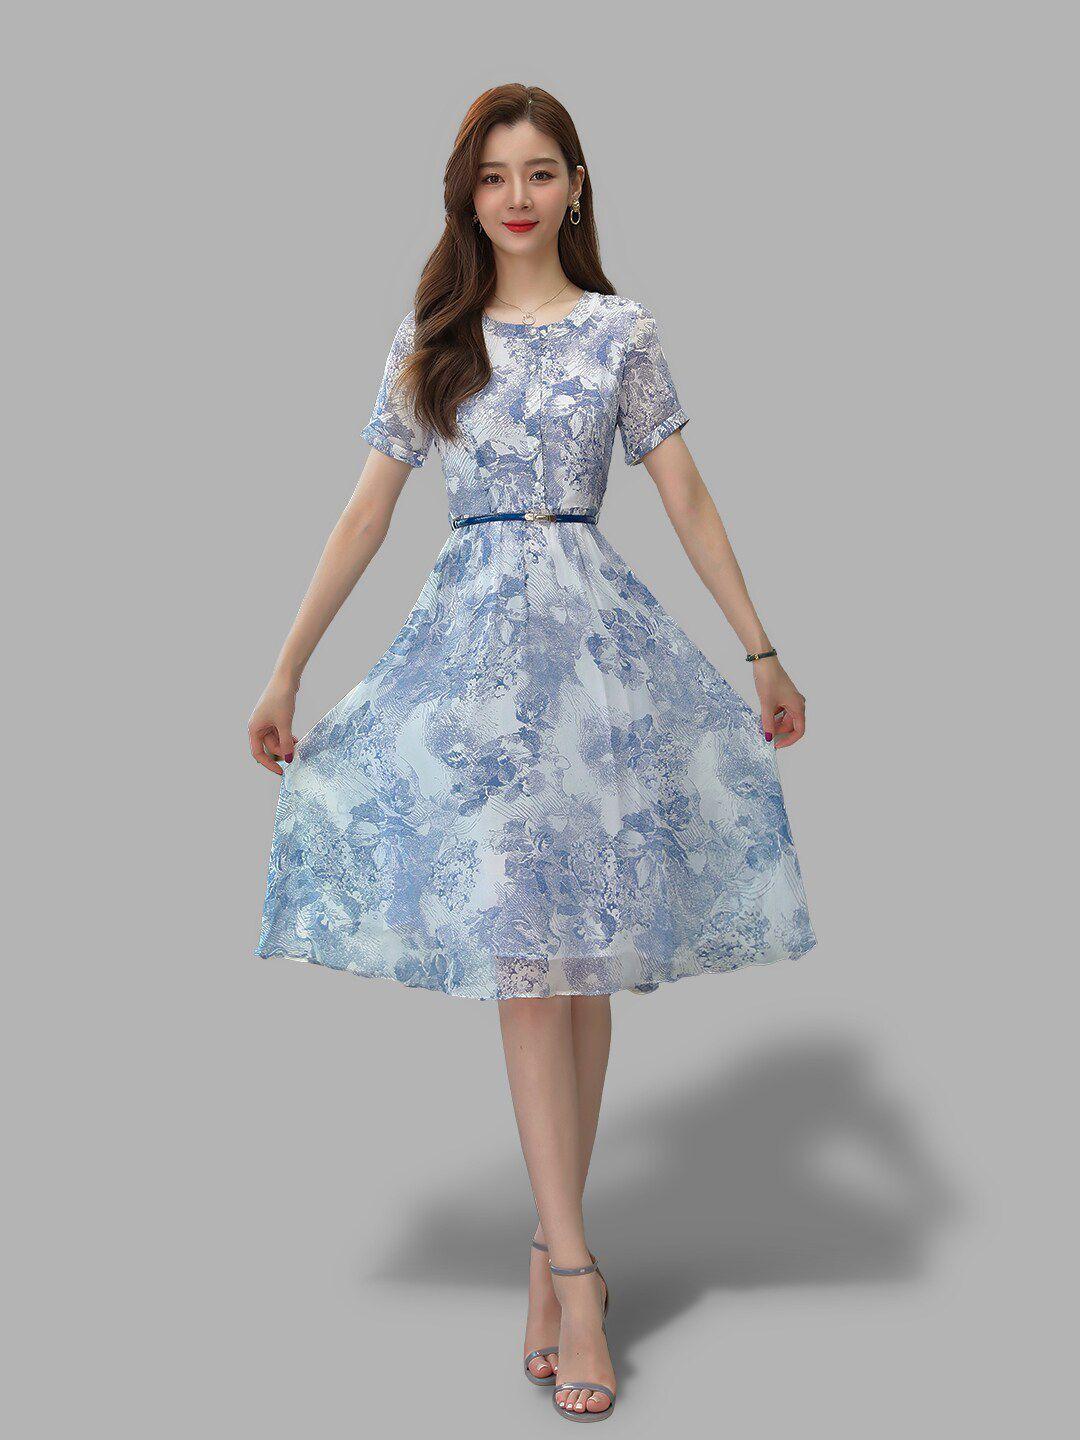 jc collection navy blue floral dress